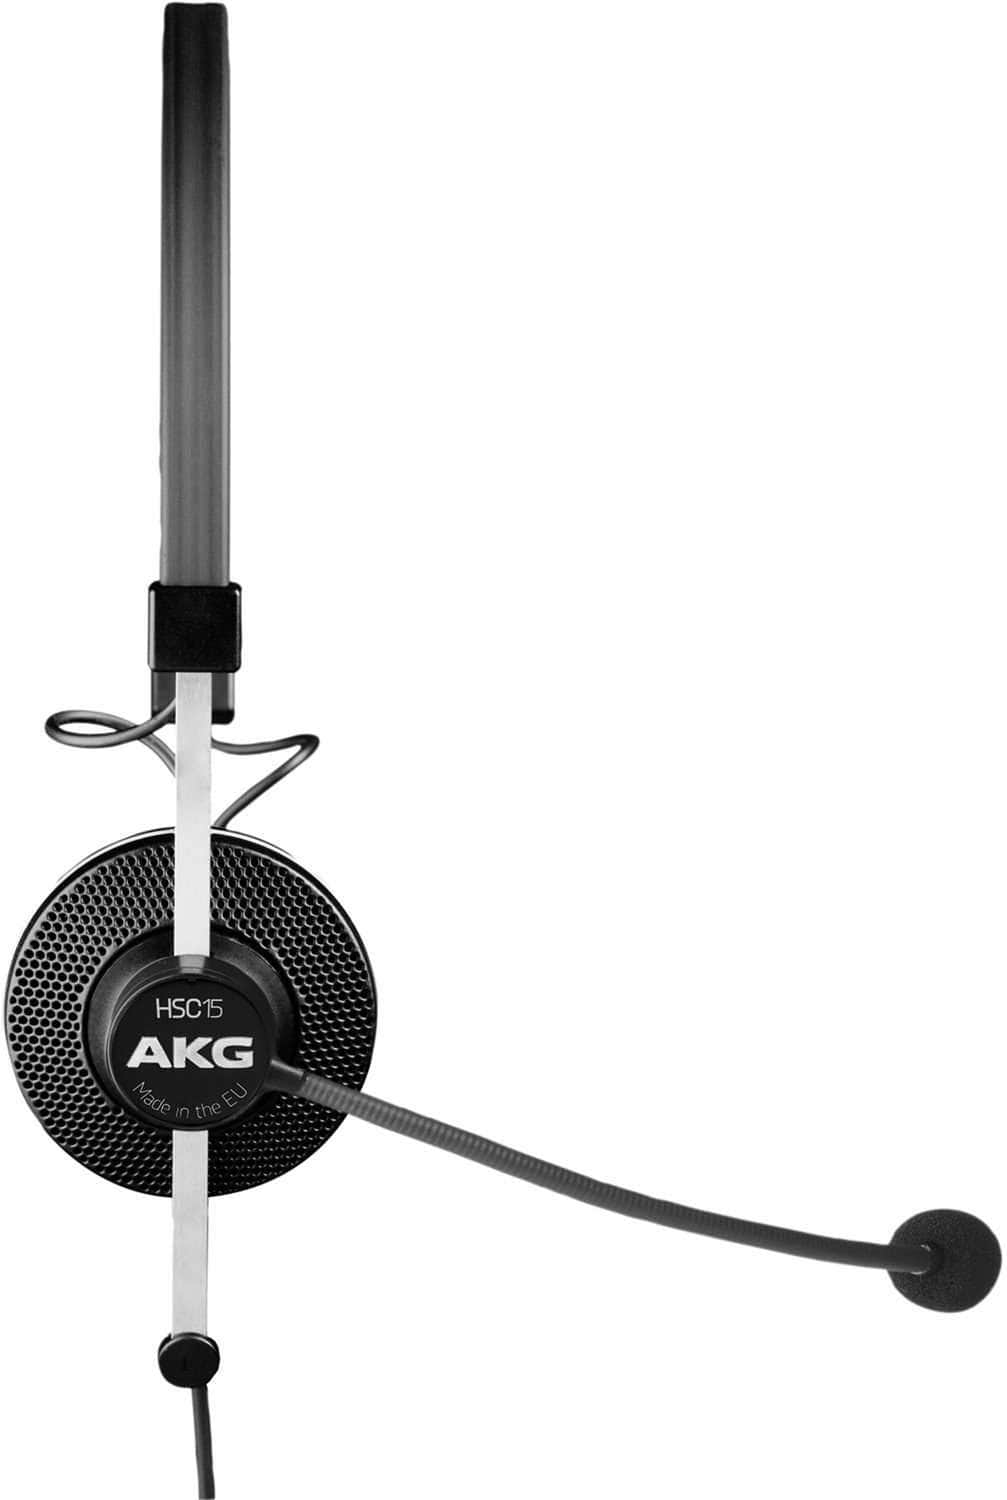 AKG HSC15 High-Performance Conference Headset - PSSL ProSound and Stage Lighting